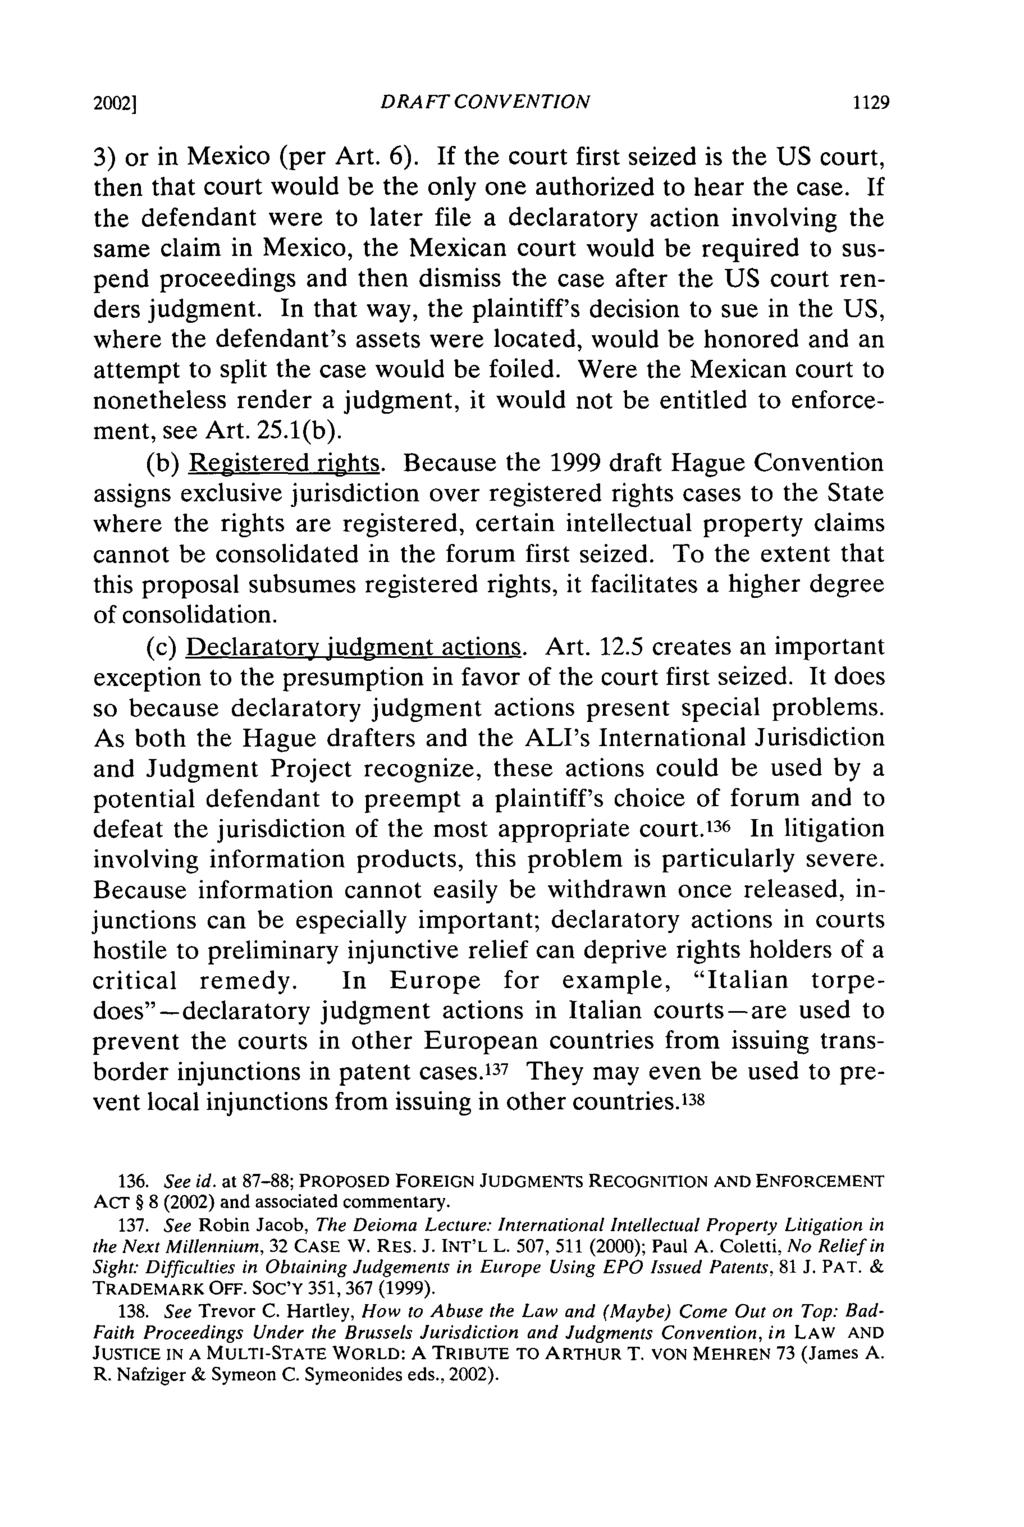 2002] DRA FT CONVENTION 3) or in Mexico (per Art. 6). If the court first seized is the US court, then that court would be the only one authorized to hear the case.